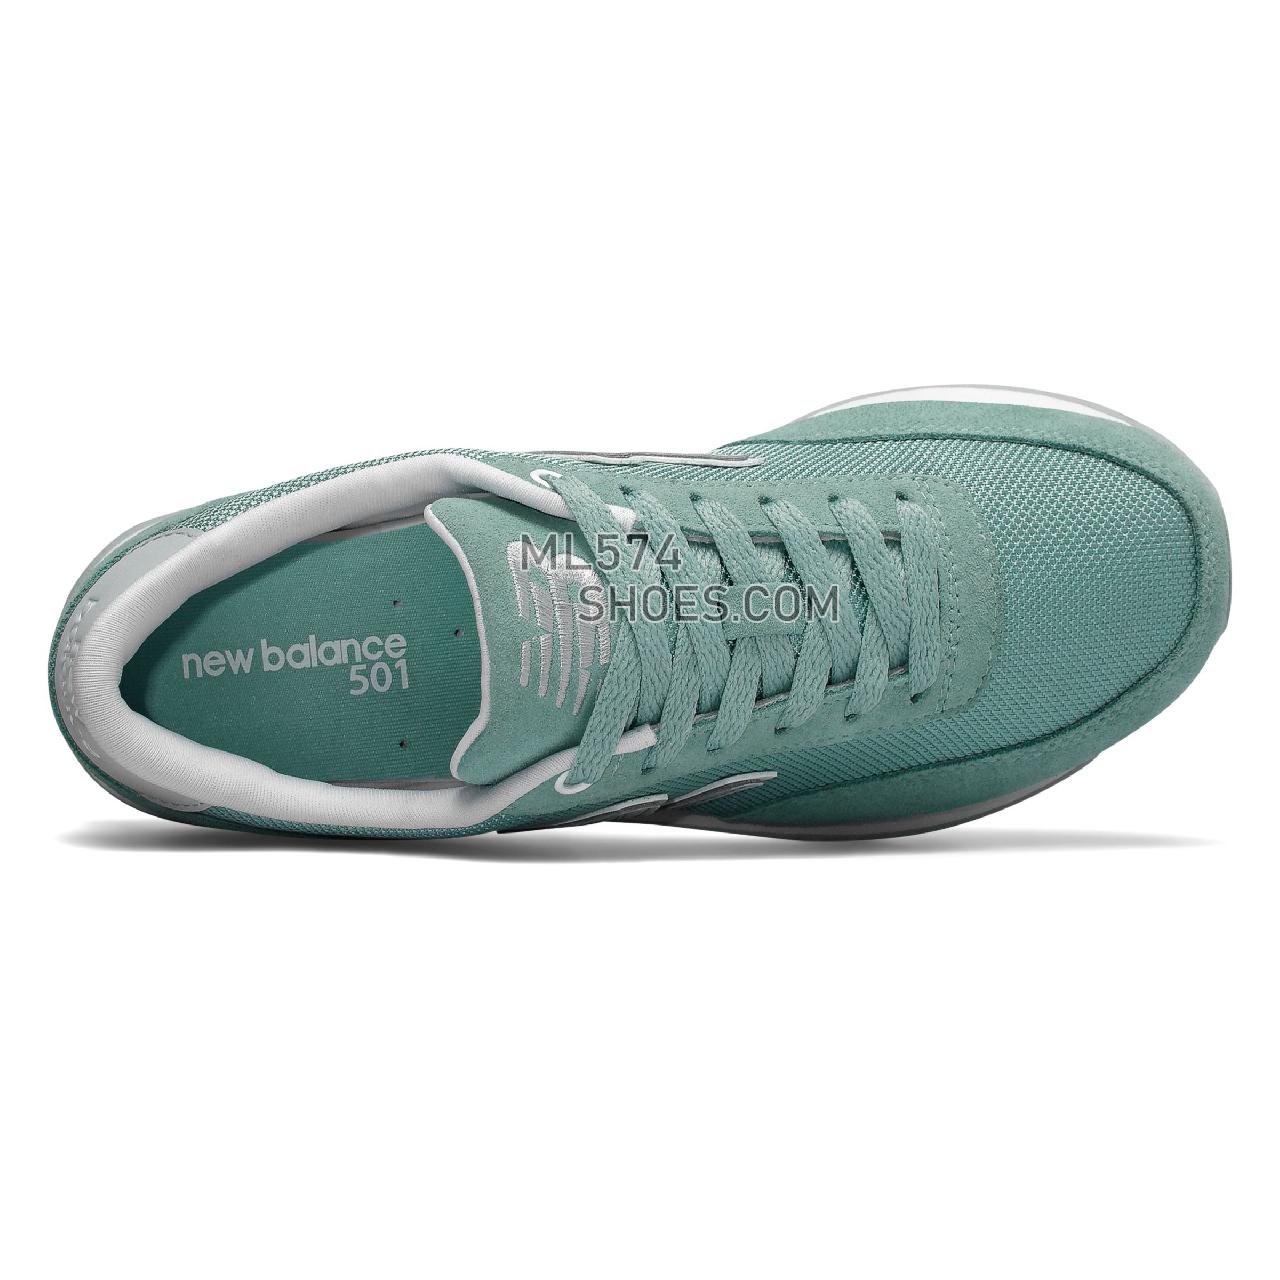 New Balance 501 Ripple Sole - Women's 501 - Classic Mineral Sage with Light Cyclone - WZ501NRB